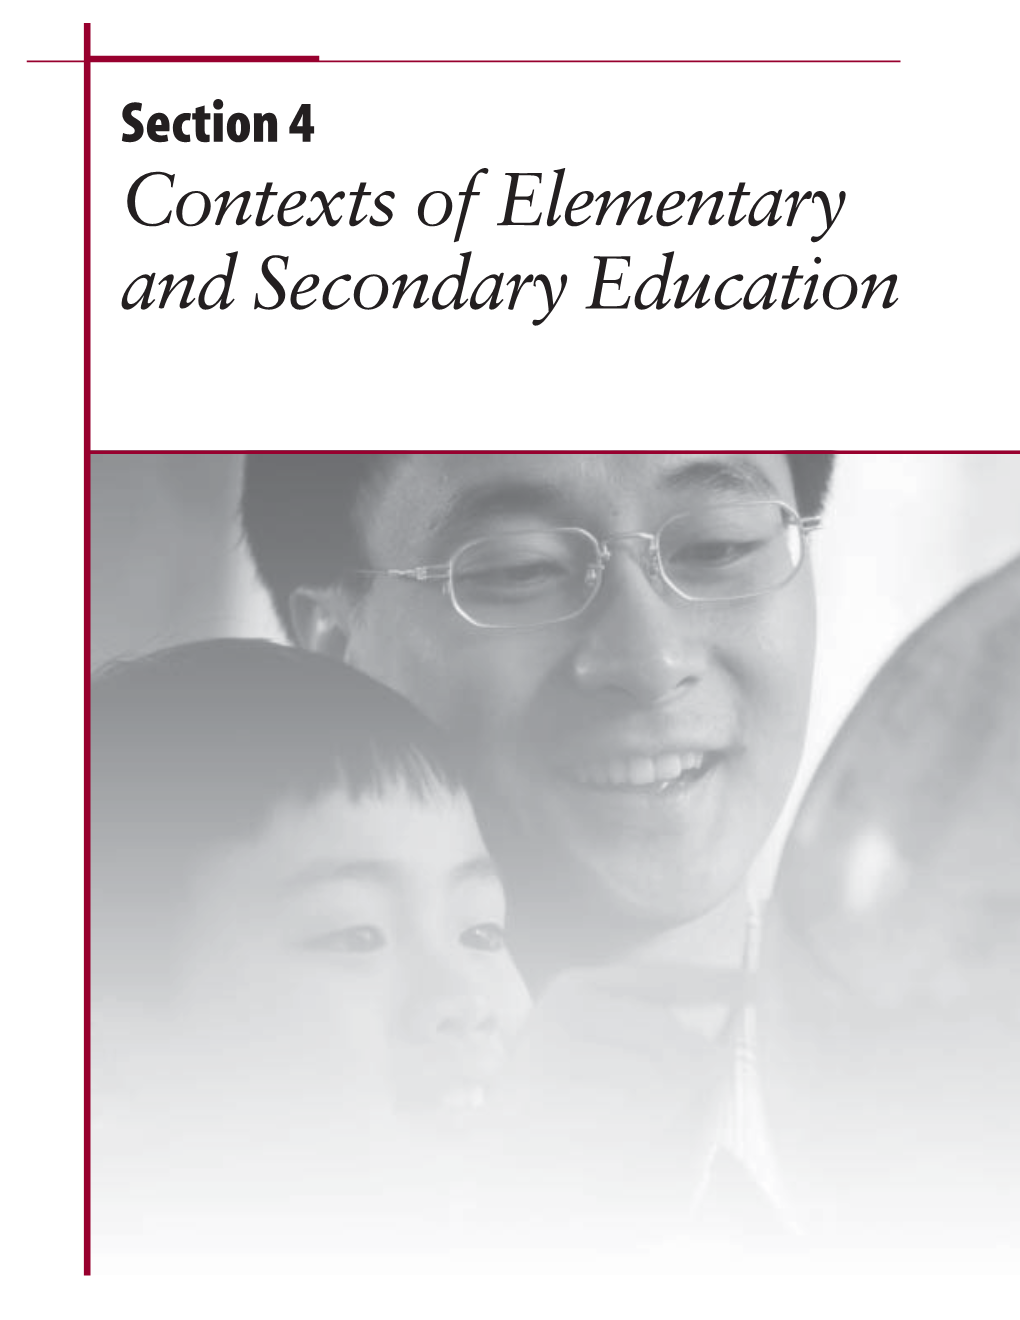 Section 4 Contexts of Elementary and Secondary Education Contents